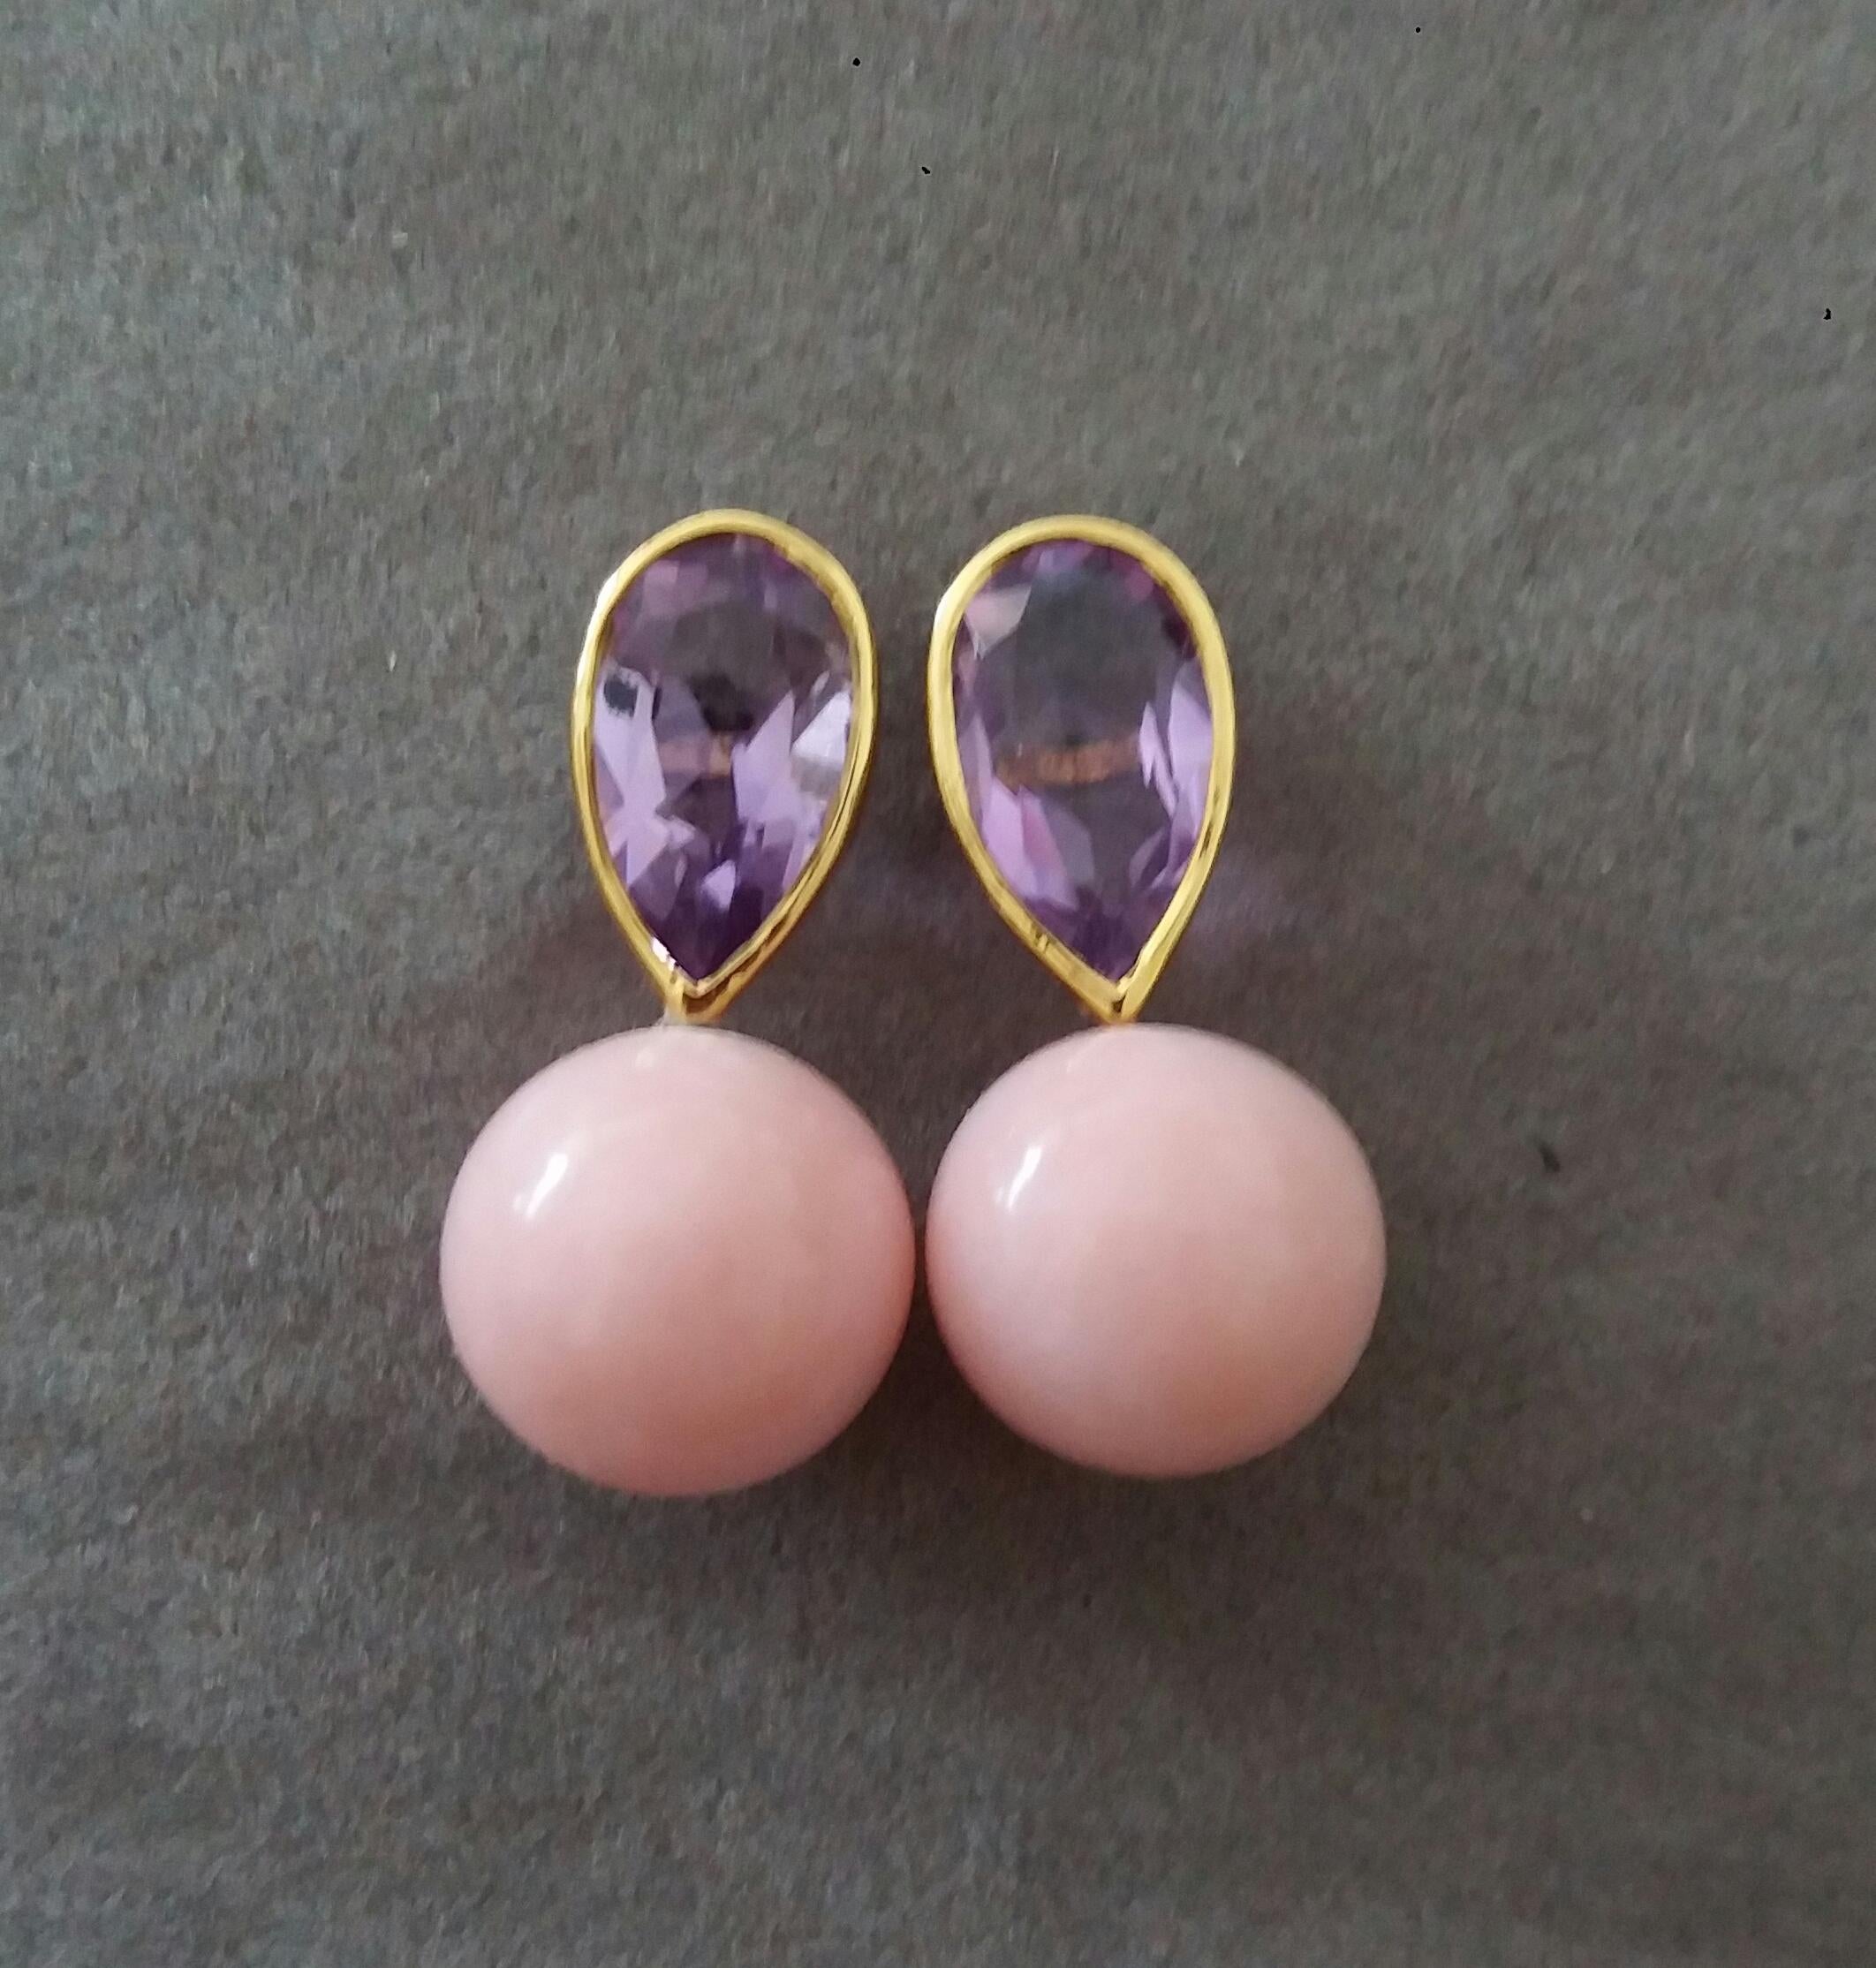 4.55 Carat Pear Shape Amethysts Gold Bezel Pink Opal Round Beads Stud Earrings In Good Condition For Sale In Bangkok, TH